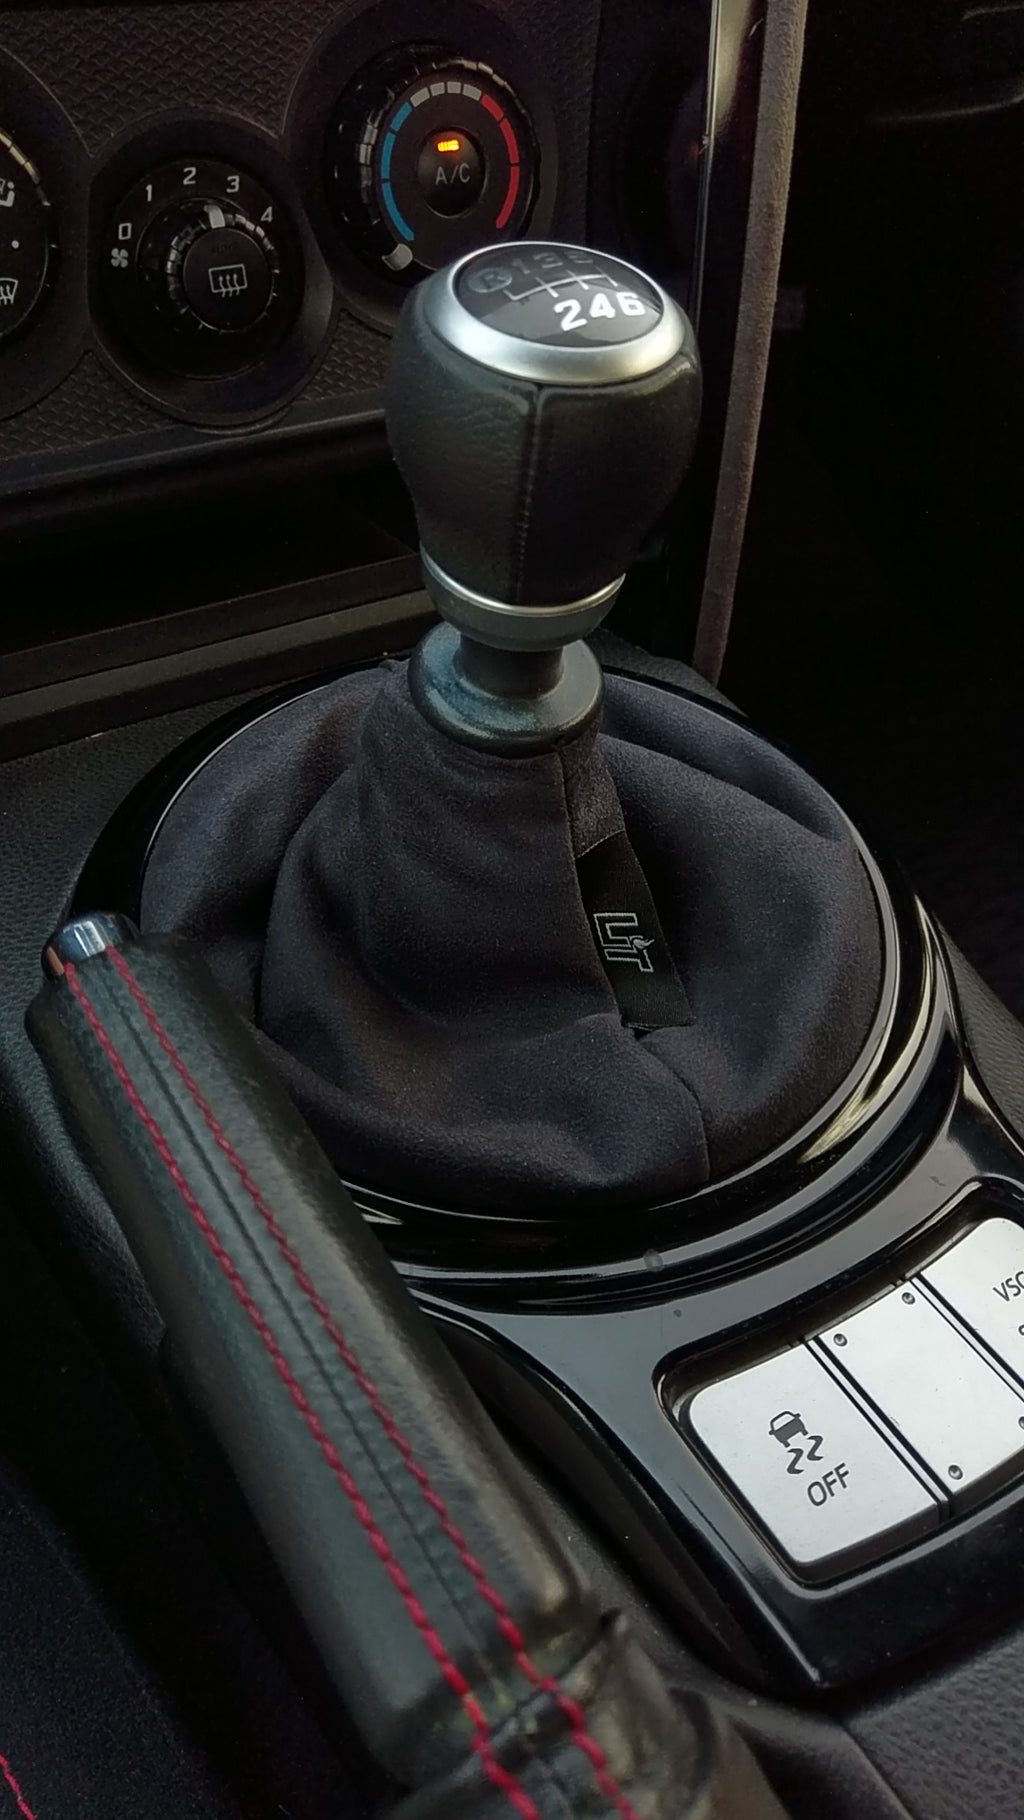 My shift knob cover (black thing with writing over the actual